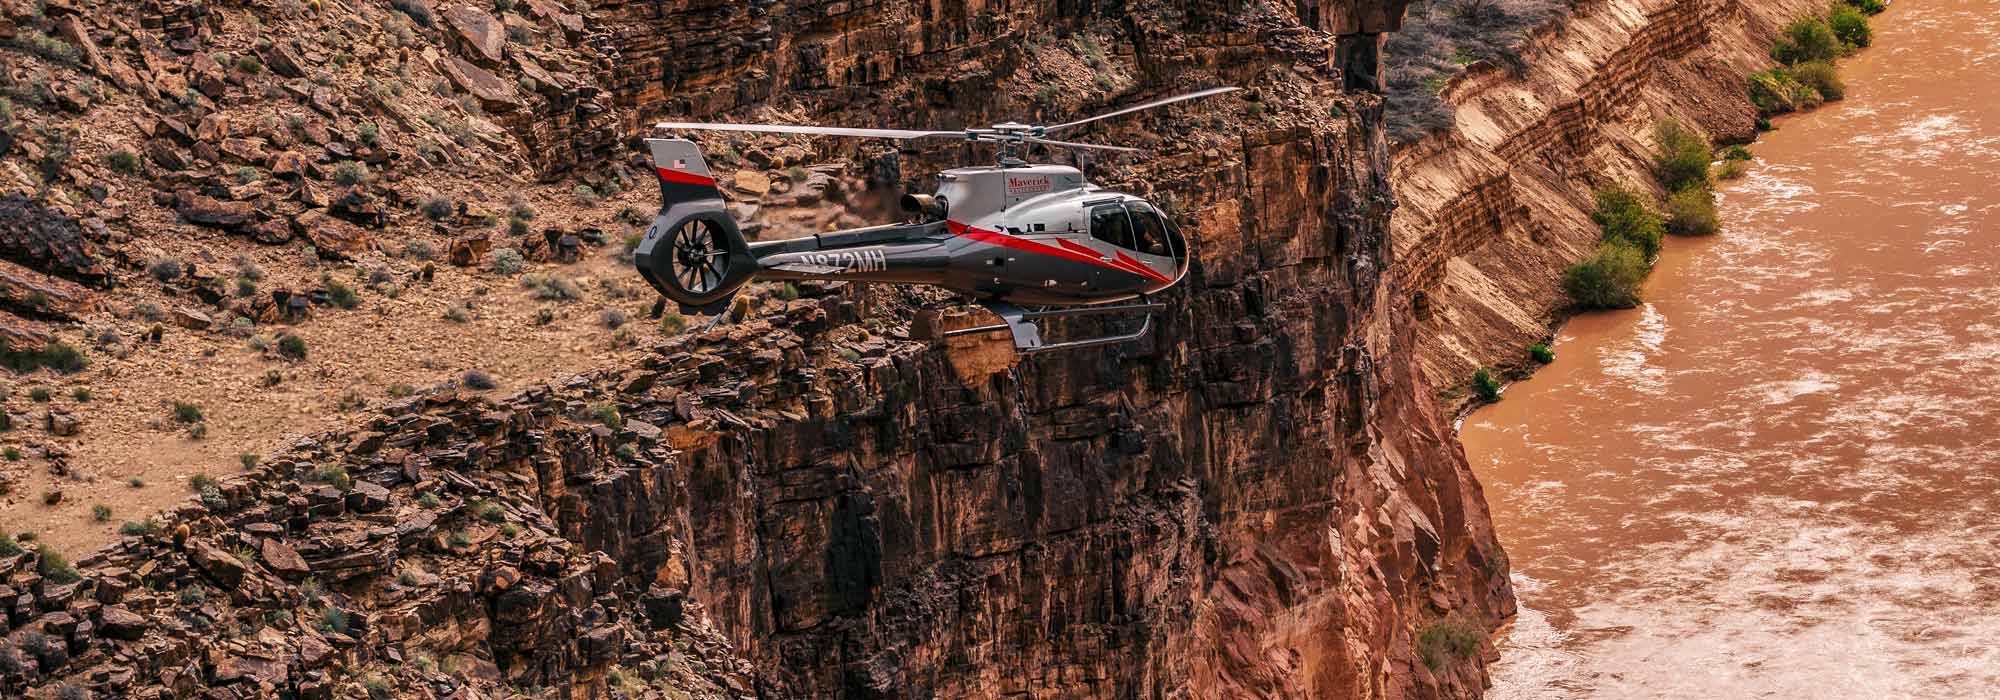 Helicopter tours to the Grand Canyon from Las Vegas